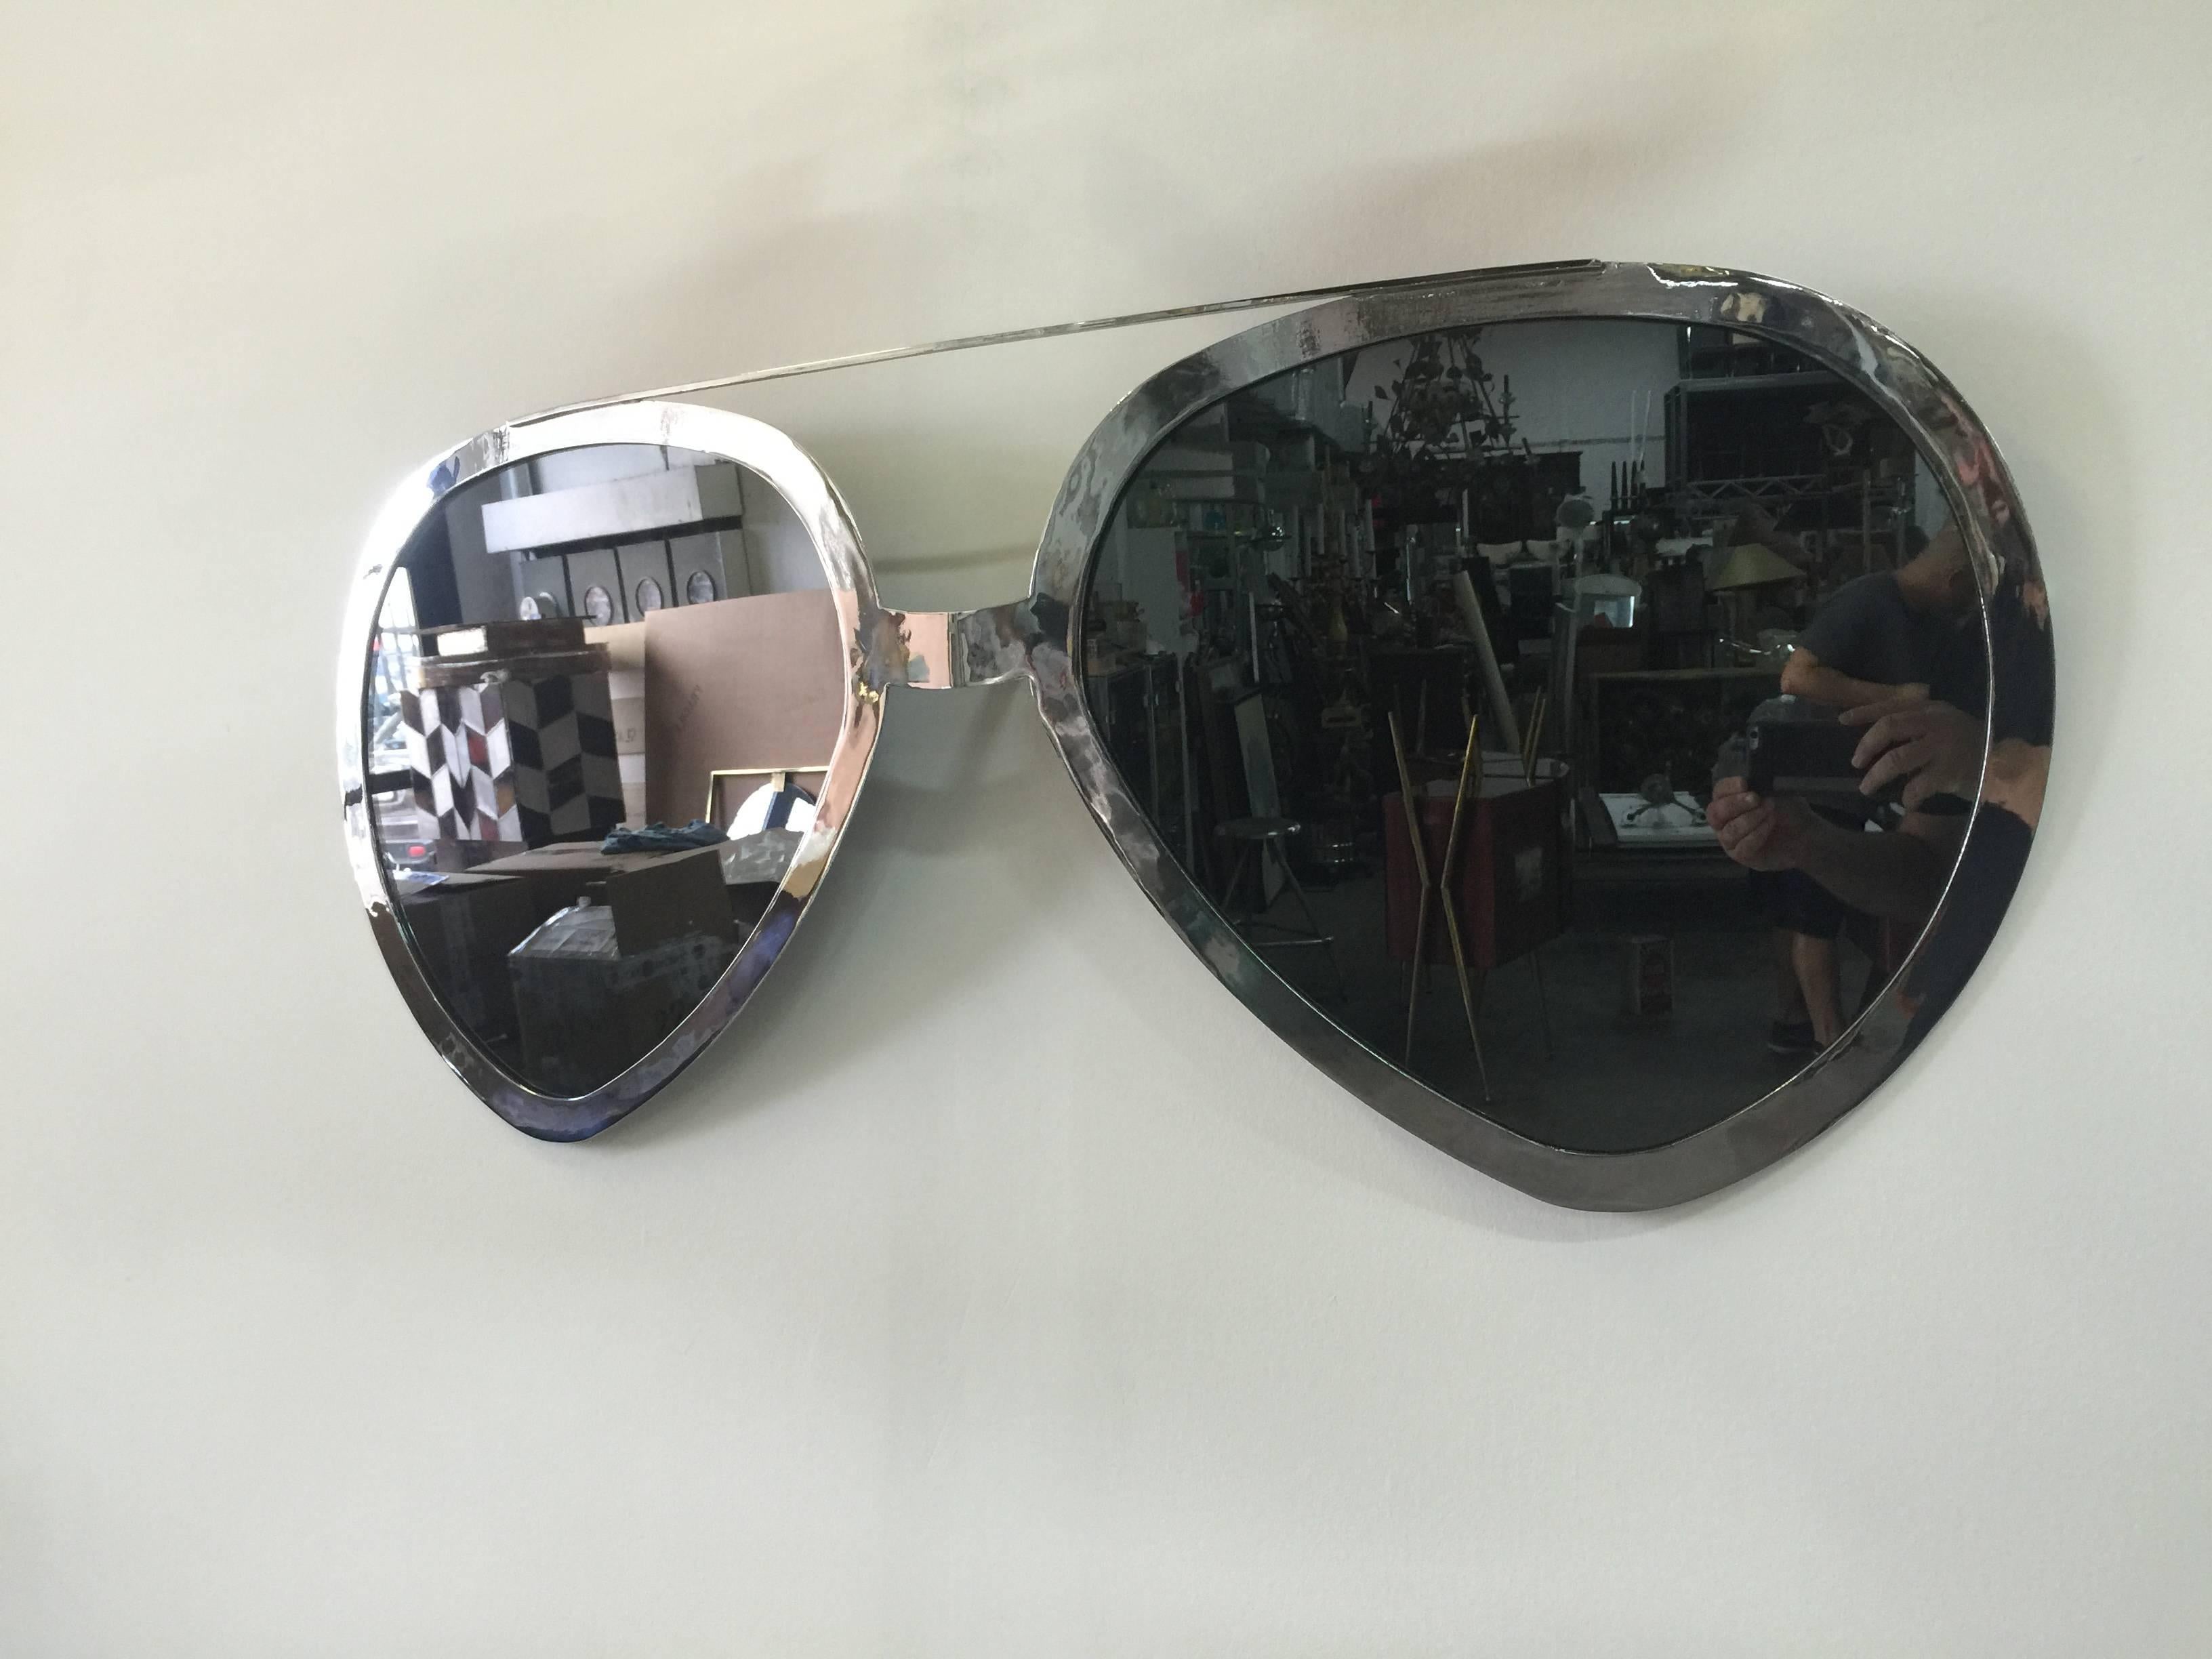 Chrome trimmed and grey mirror - these oversized Aviators are a chic 